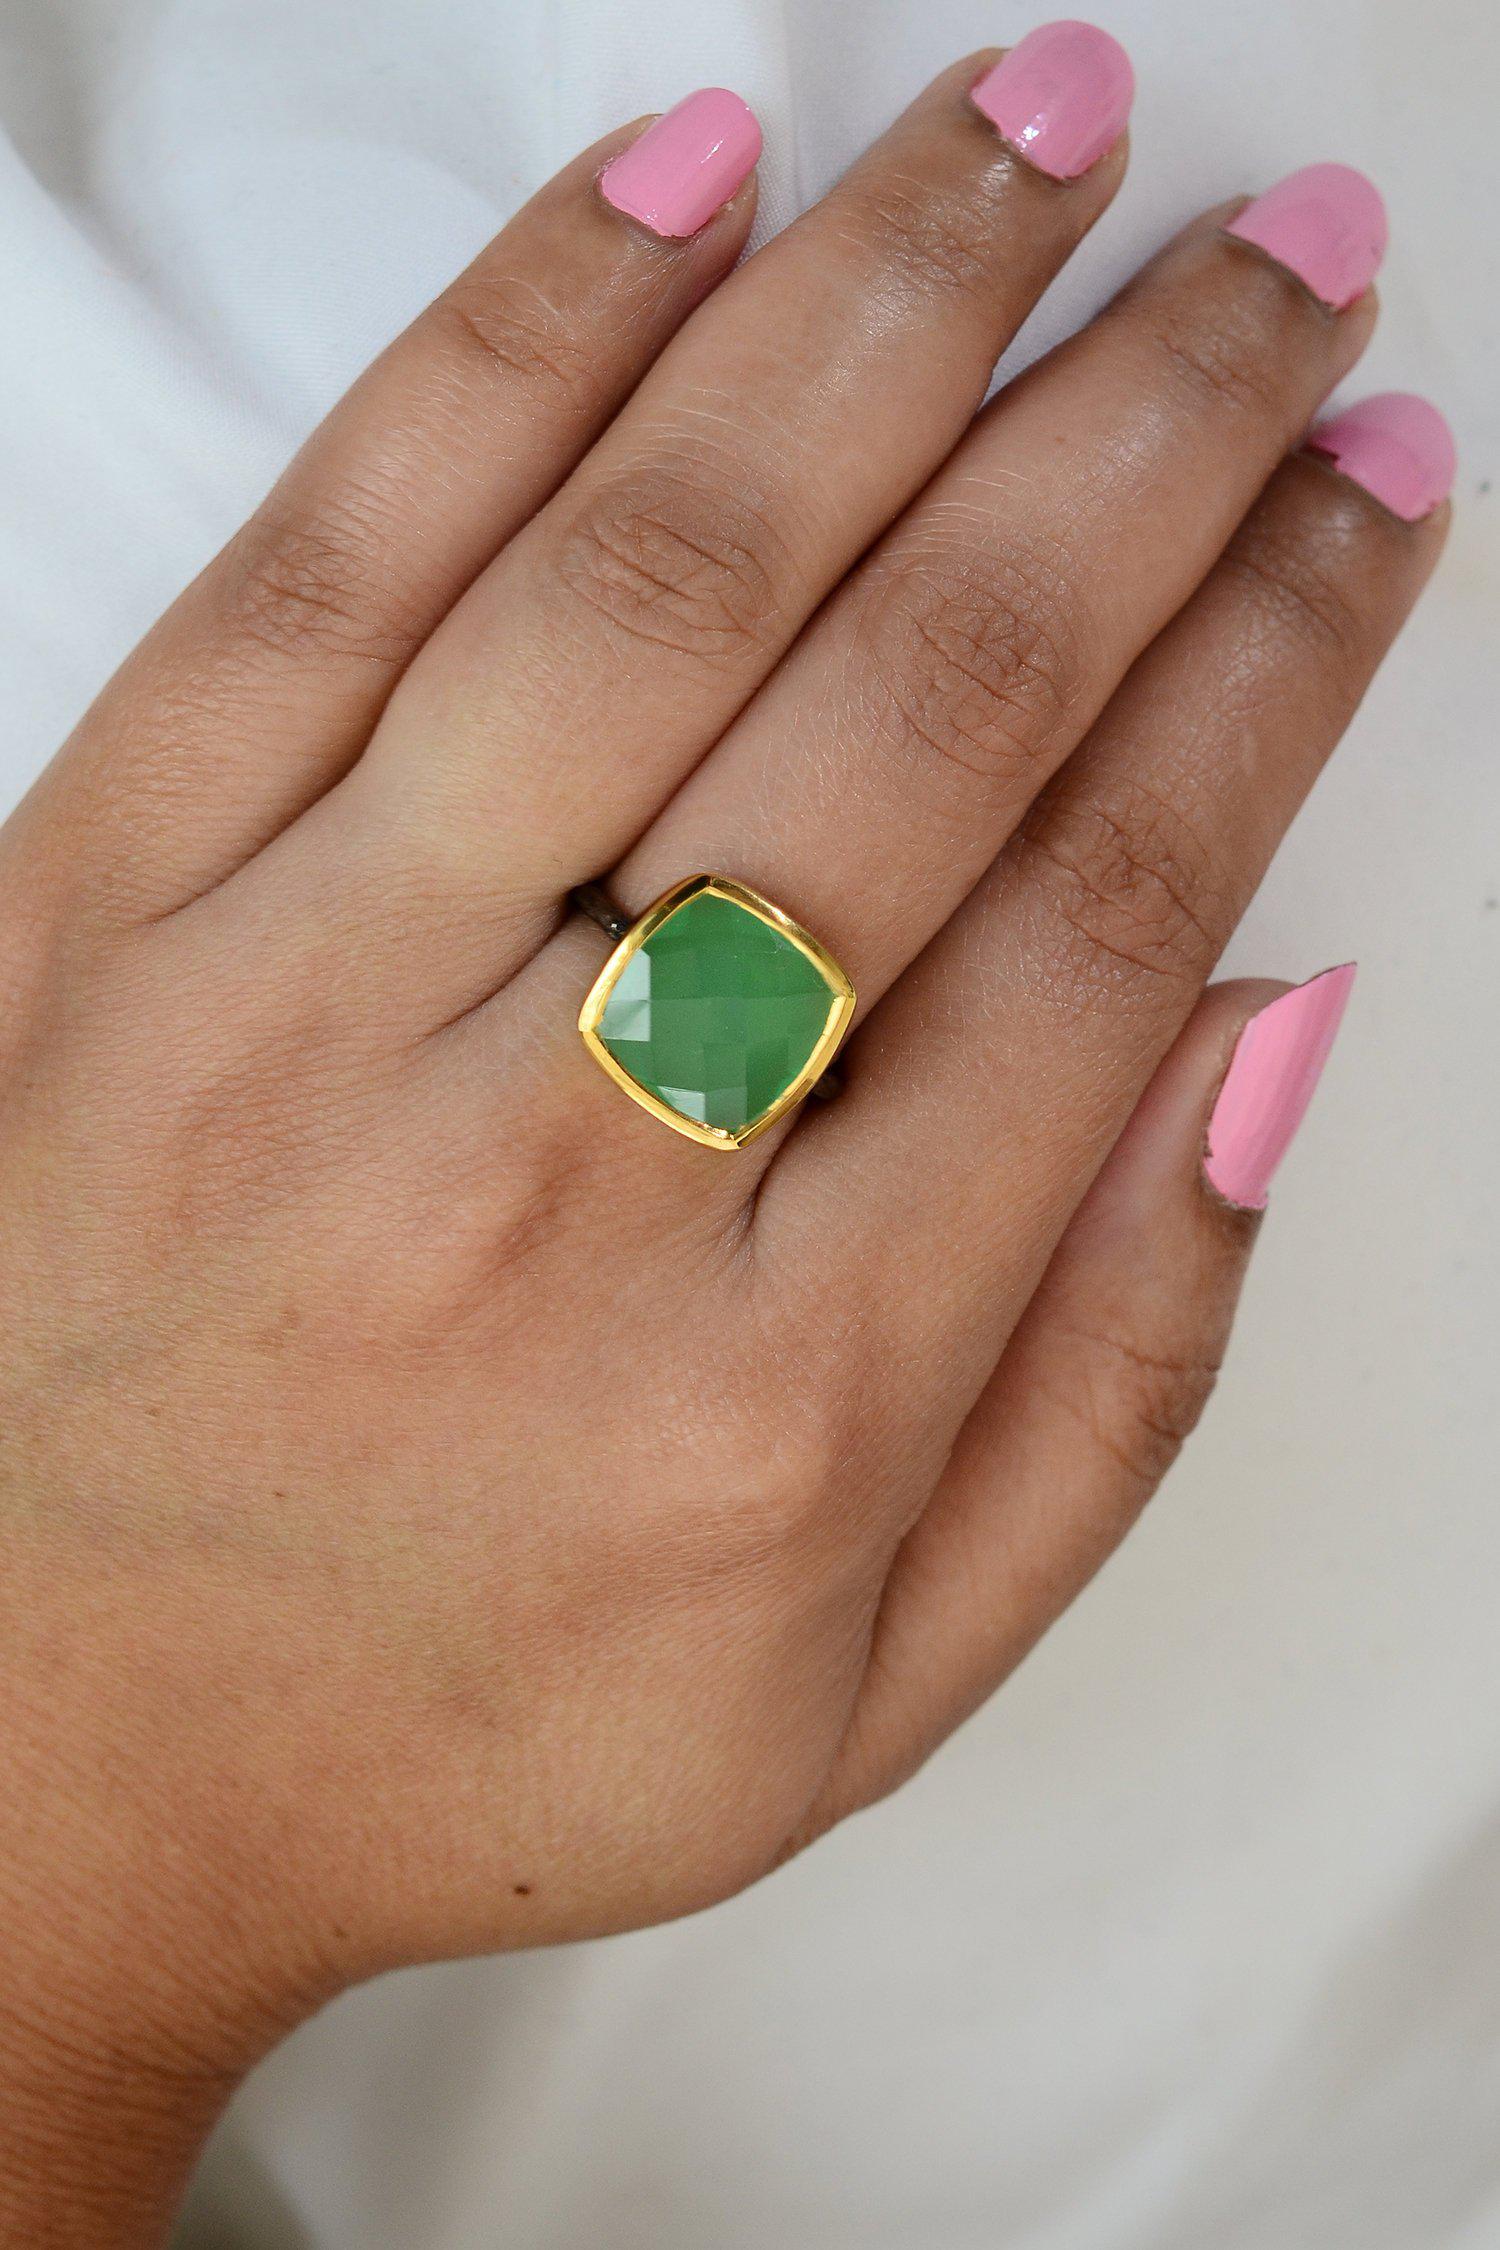 30 Carat Columbian Emerald Ring with Pyrite Inclusion - Shaftel Diamonds